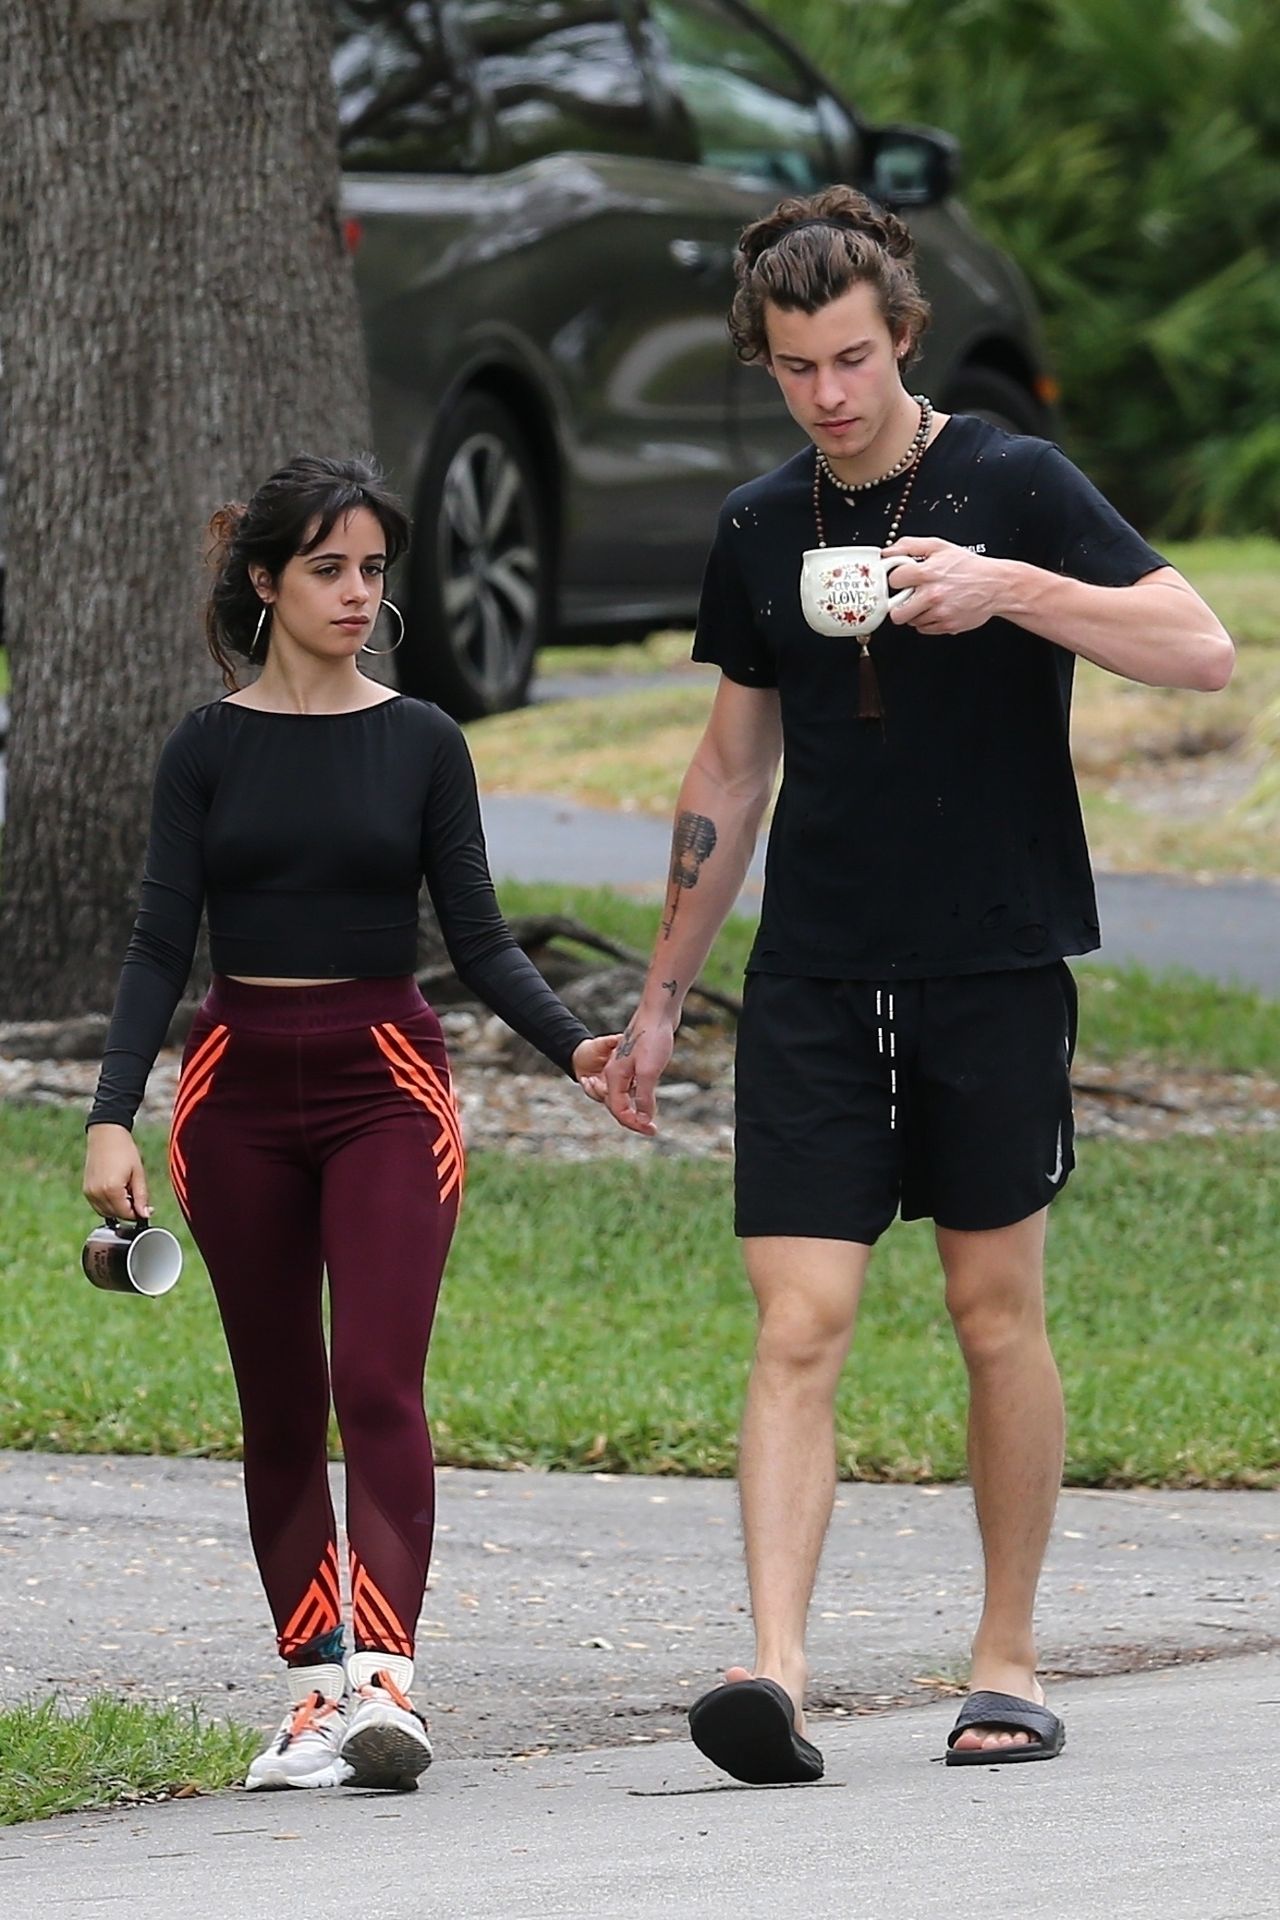 Camila Cabello & Shawn Mendes Hold Hands During A Morning Walk In Miami 0026